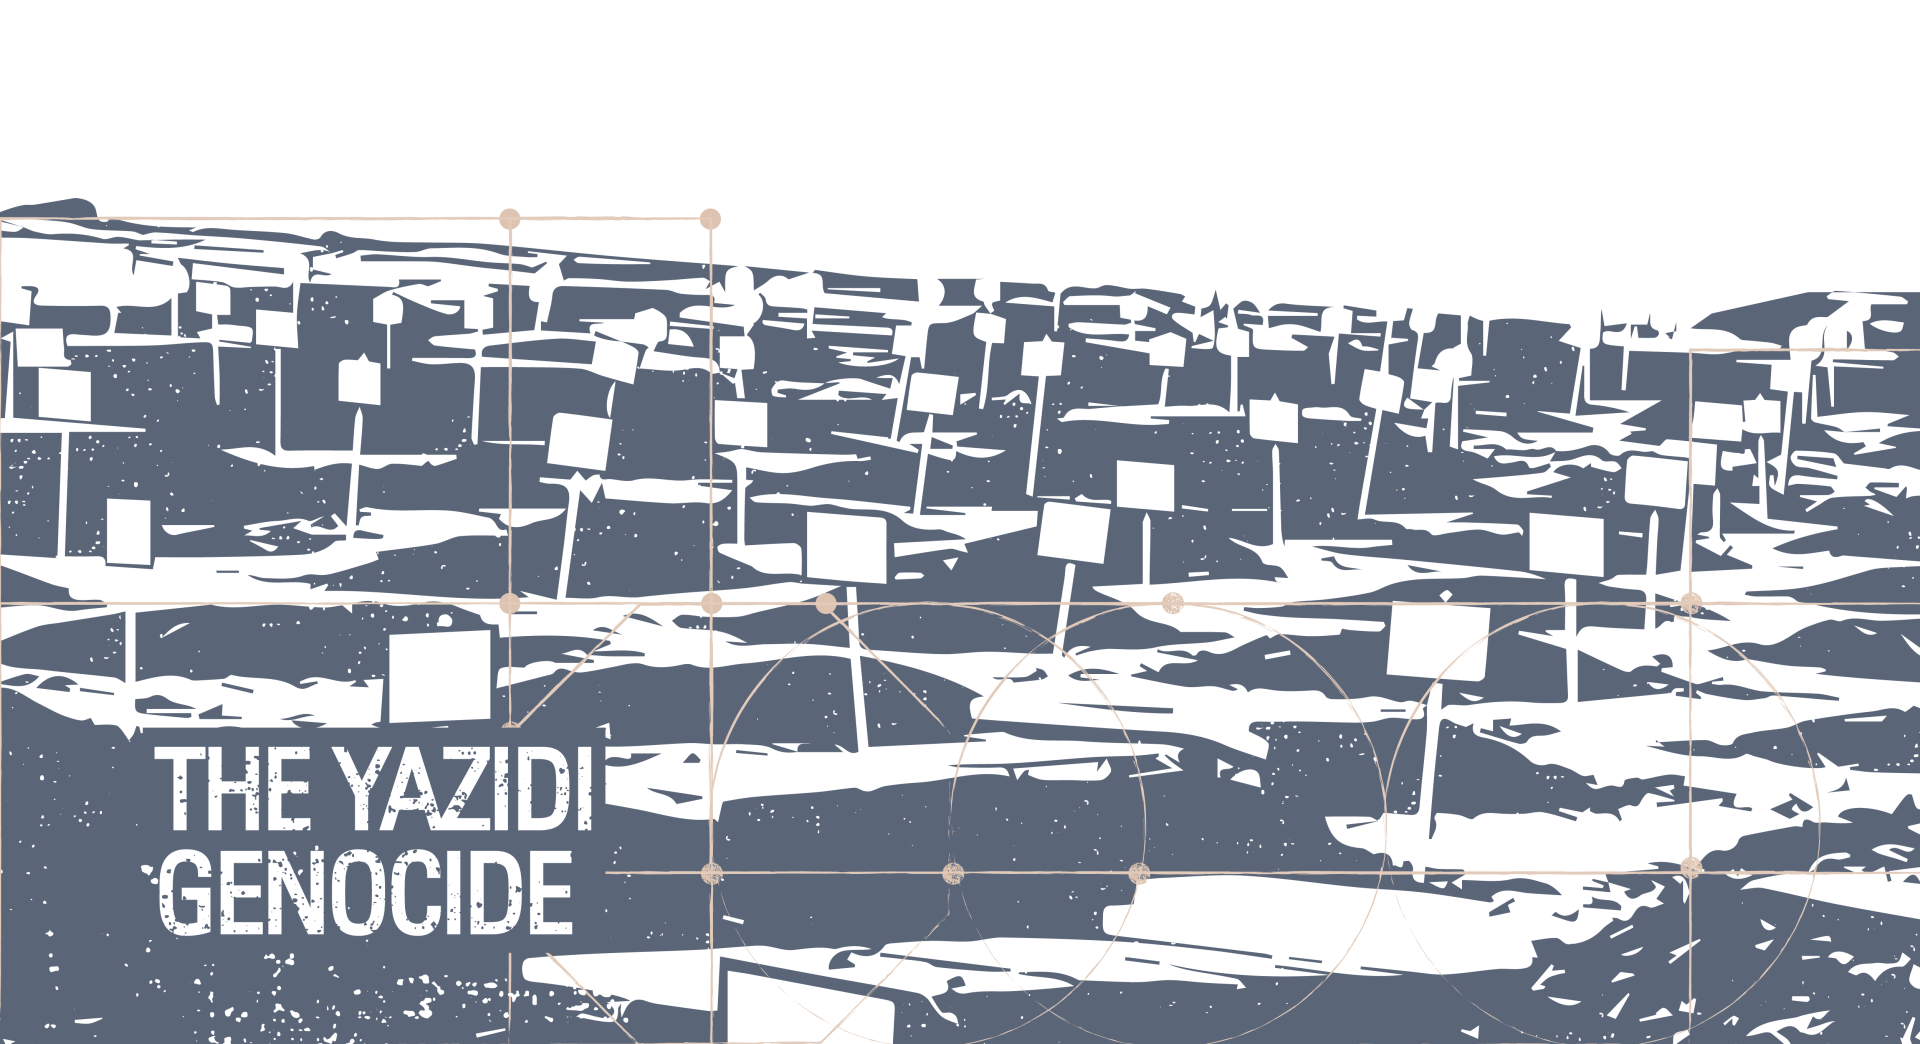 Illustration of mass graves of victims of the Yazidi genocide